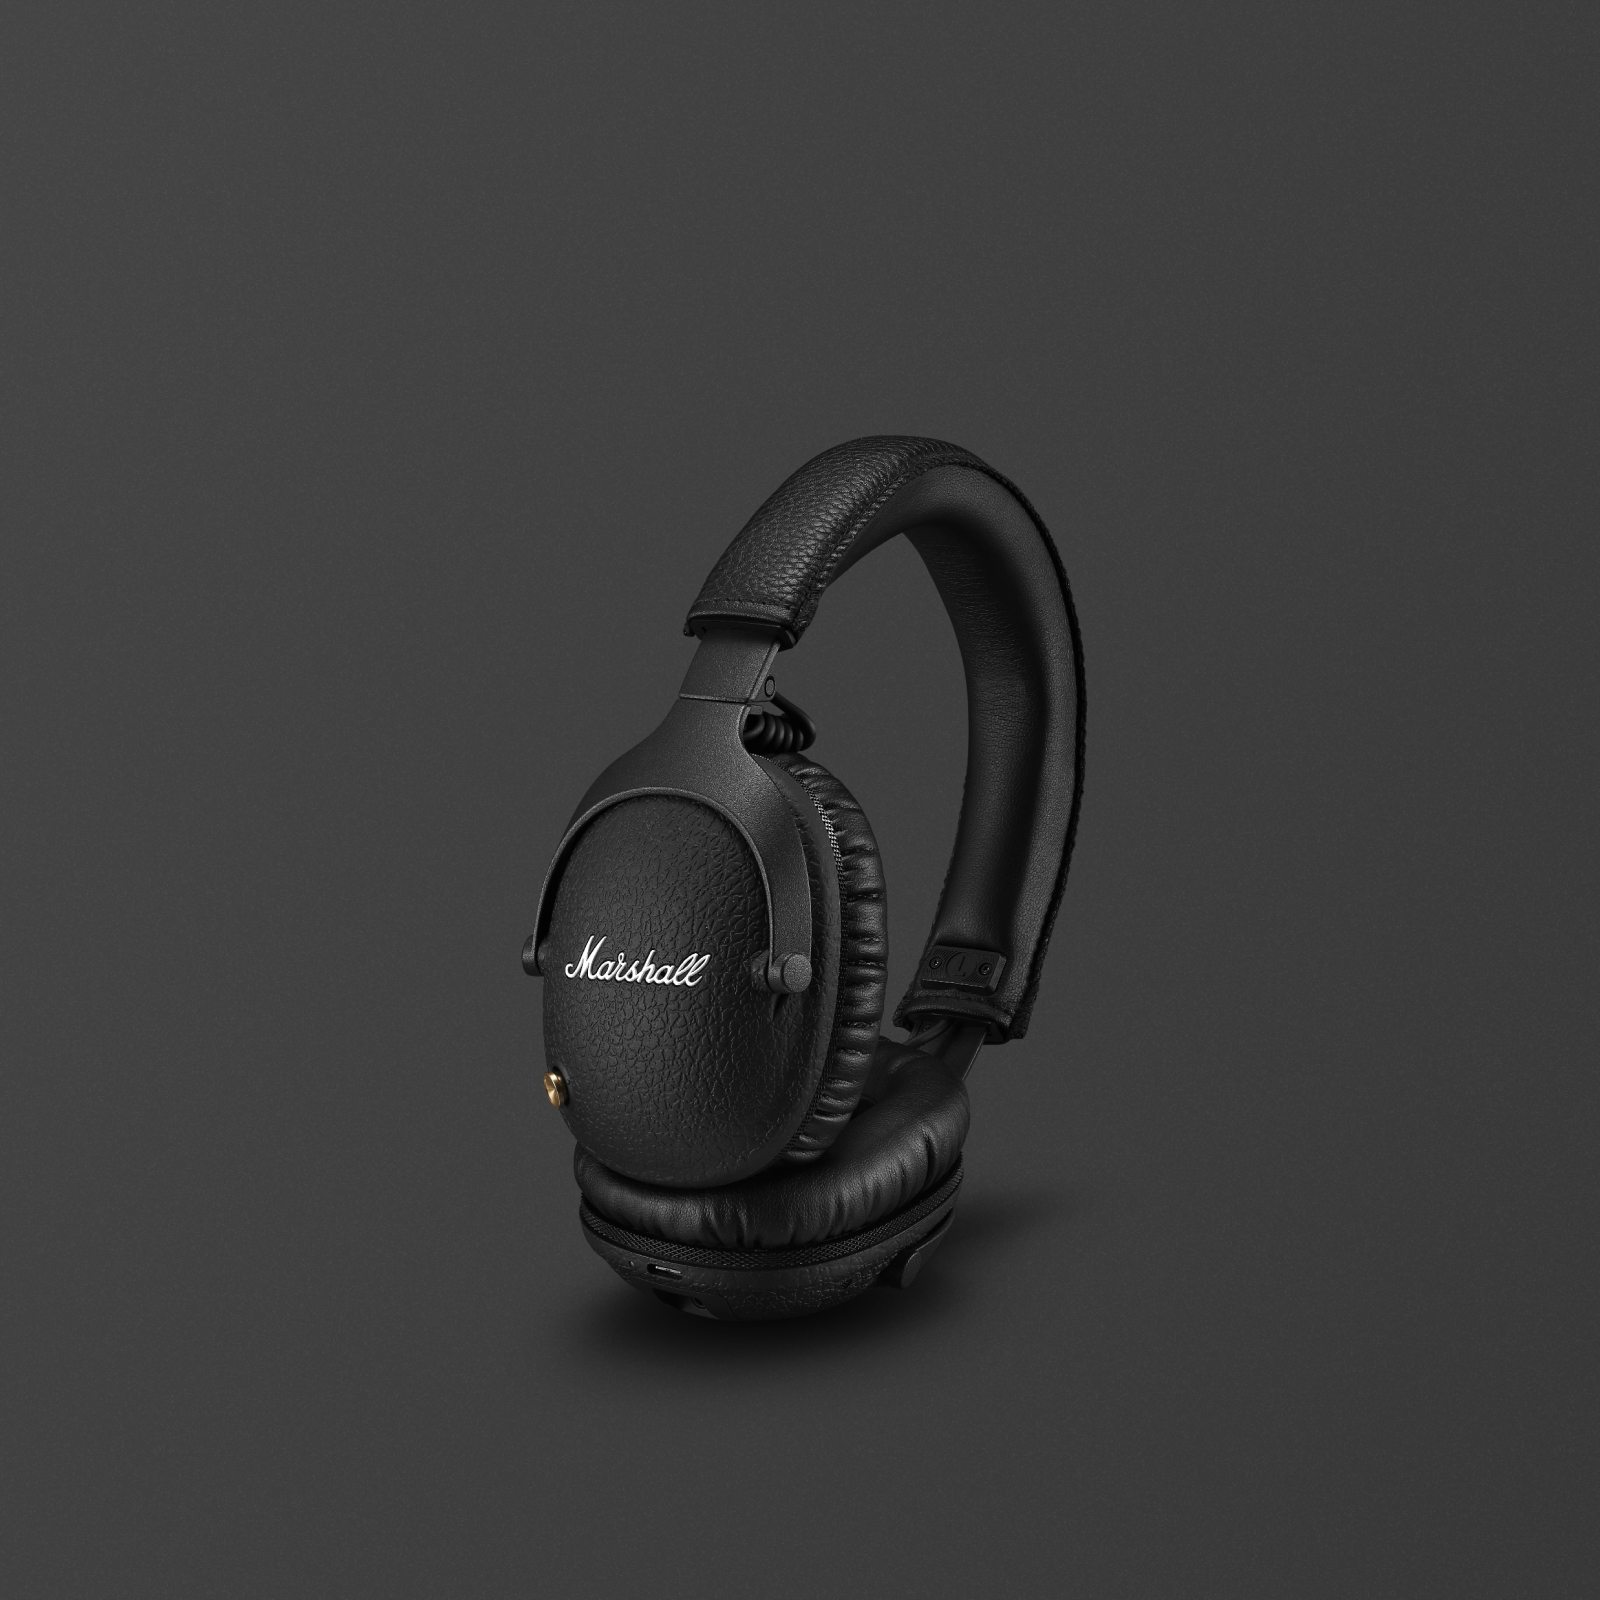 Marshall headphone with microphone on a black background.